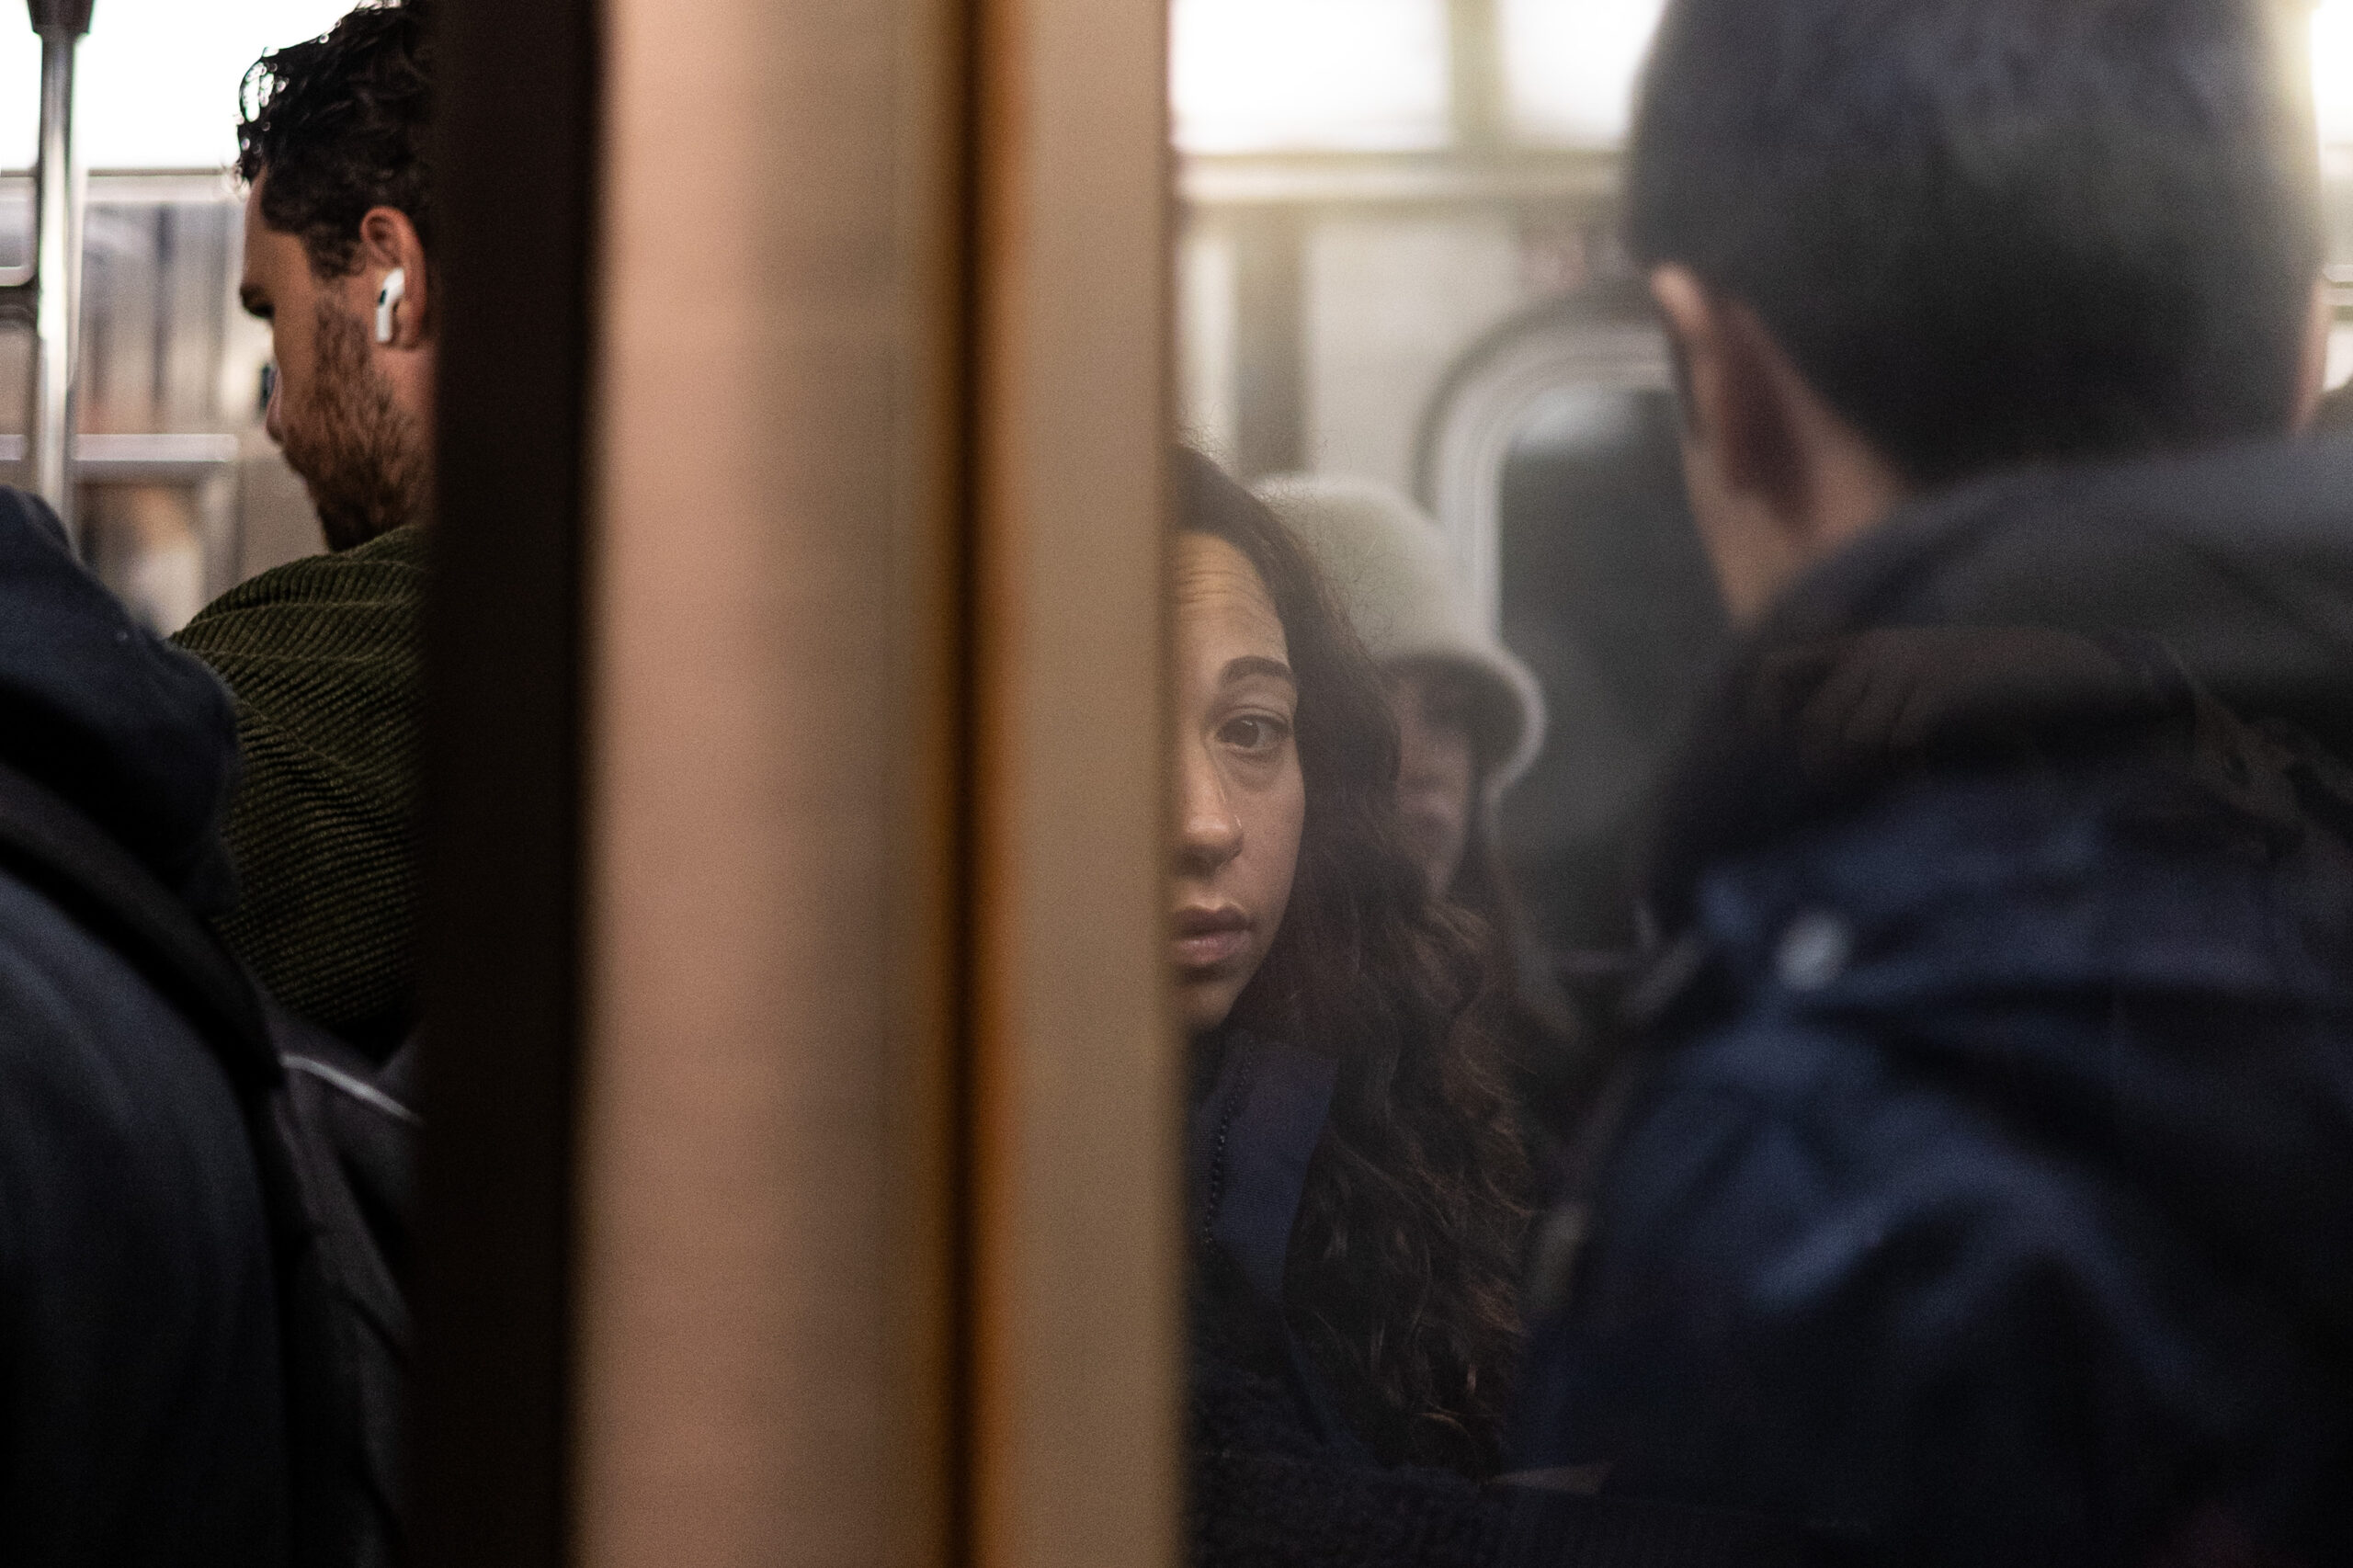 A woman looks directly into the camera as she stands expressionless in a crowded subway car. Exactly half of her face is covered by the opening subway door. On both sides of her are men with their backs turned towards the door.